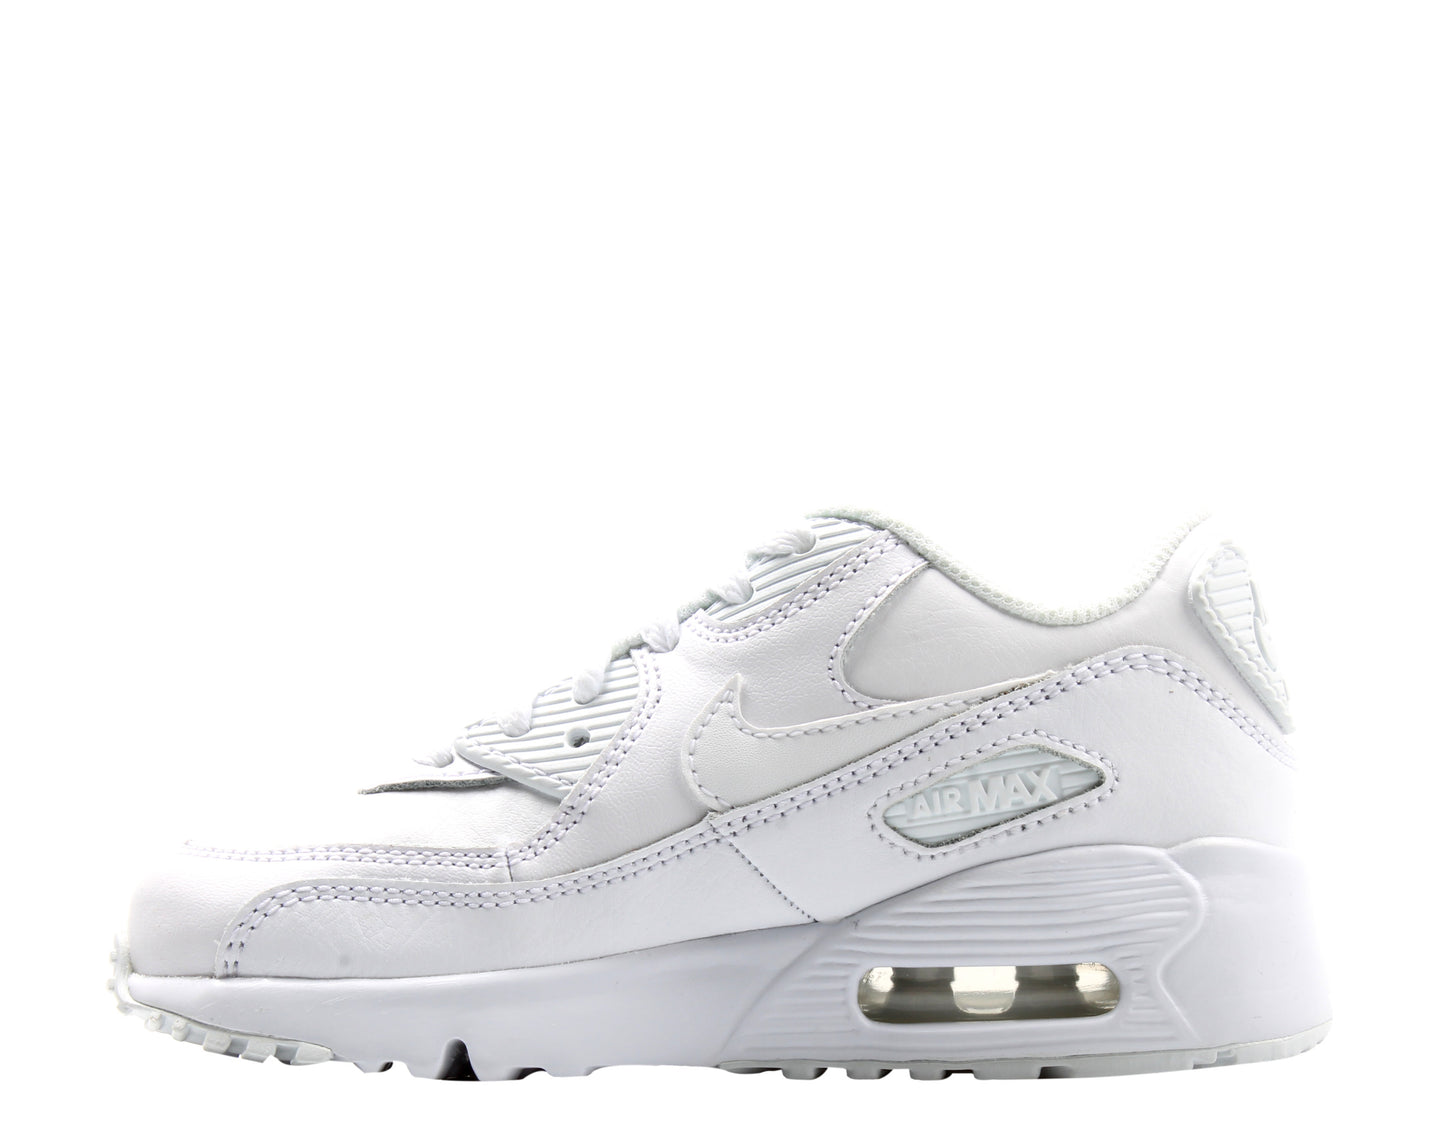 Nike Air Max 90 LTR (PS) White/White Big Kid's Running Shoes 833414-100